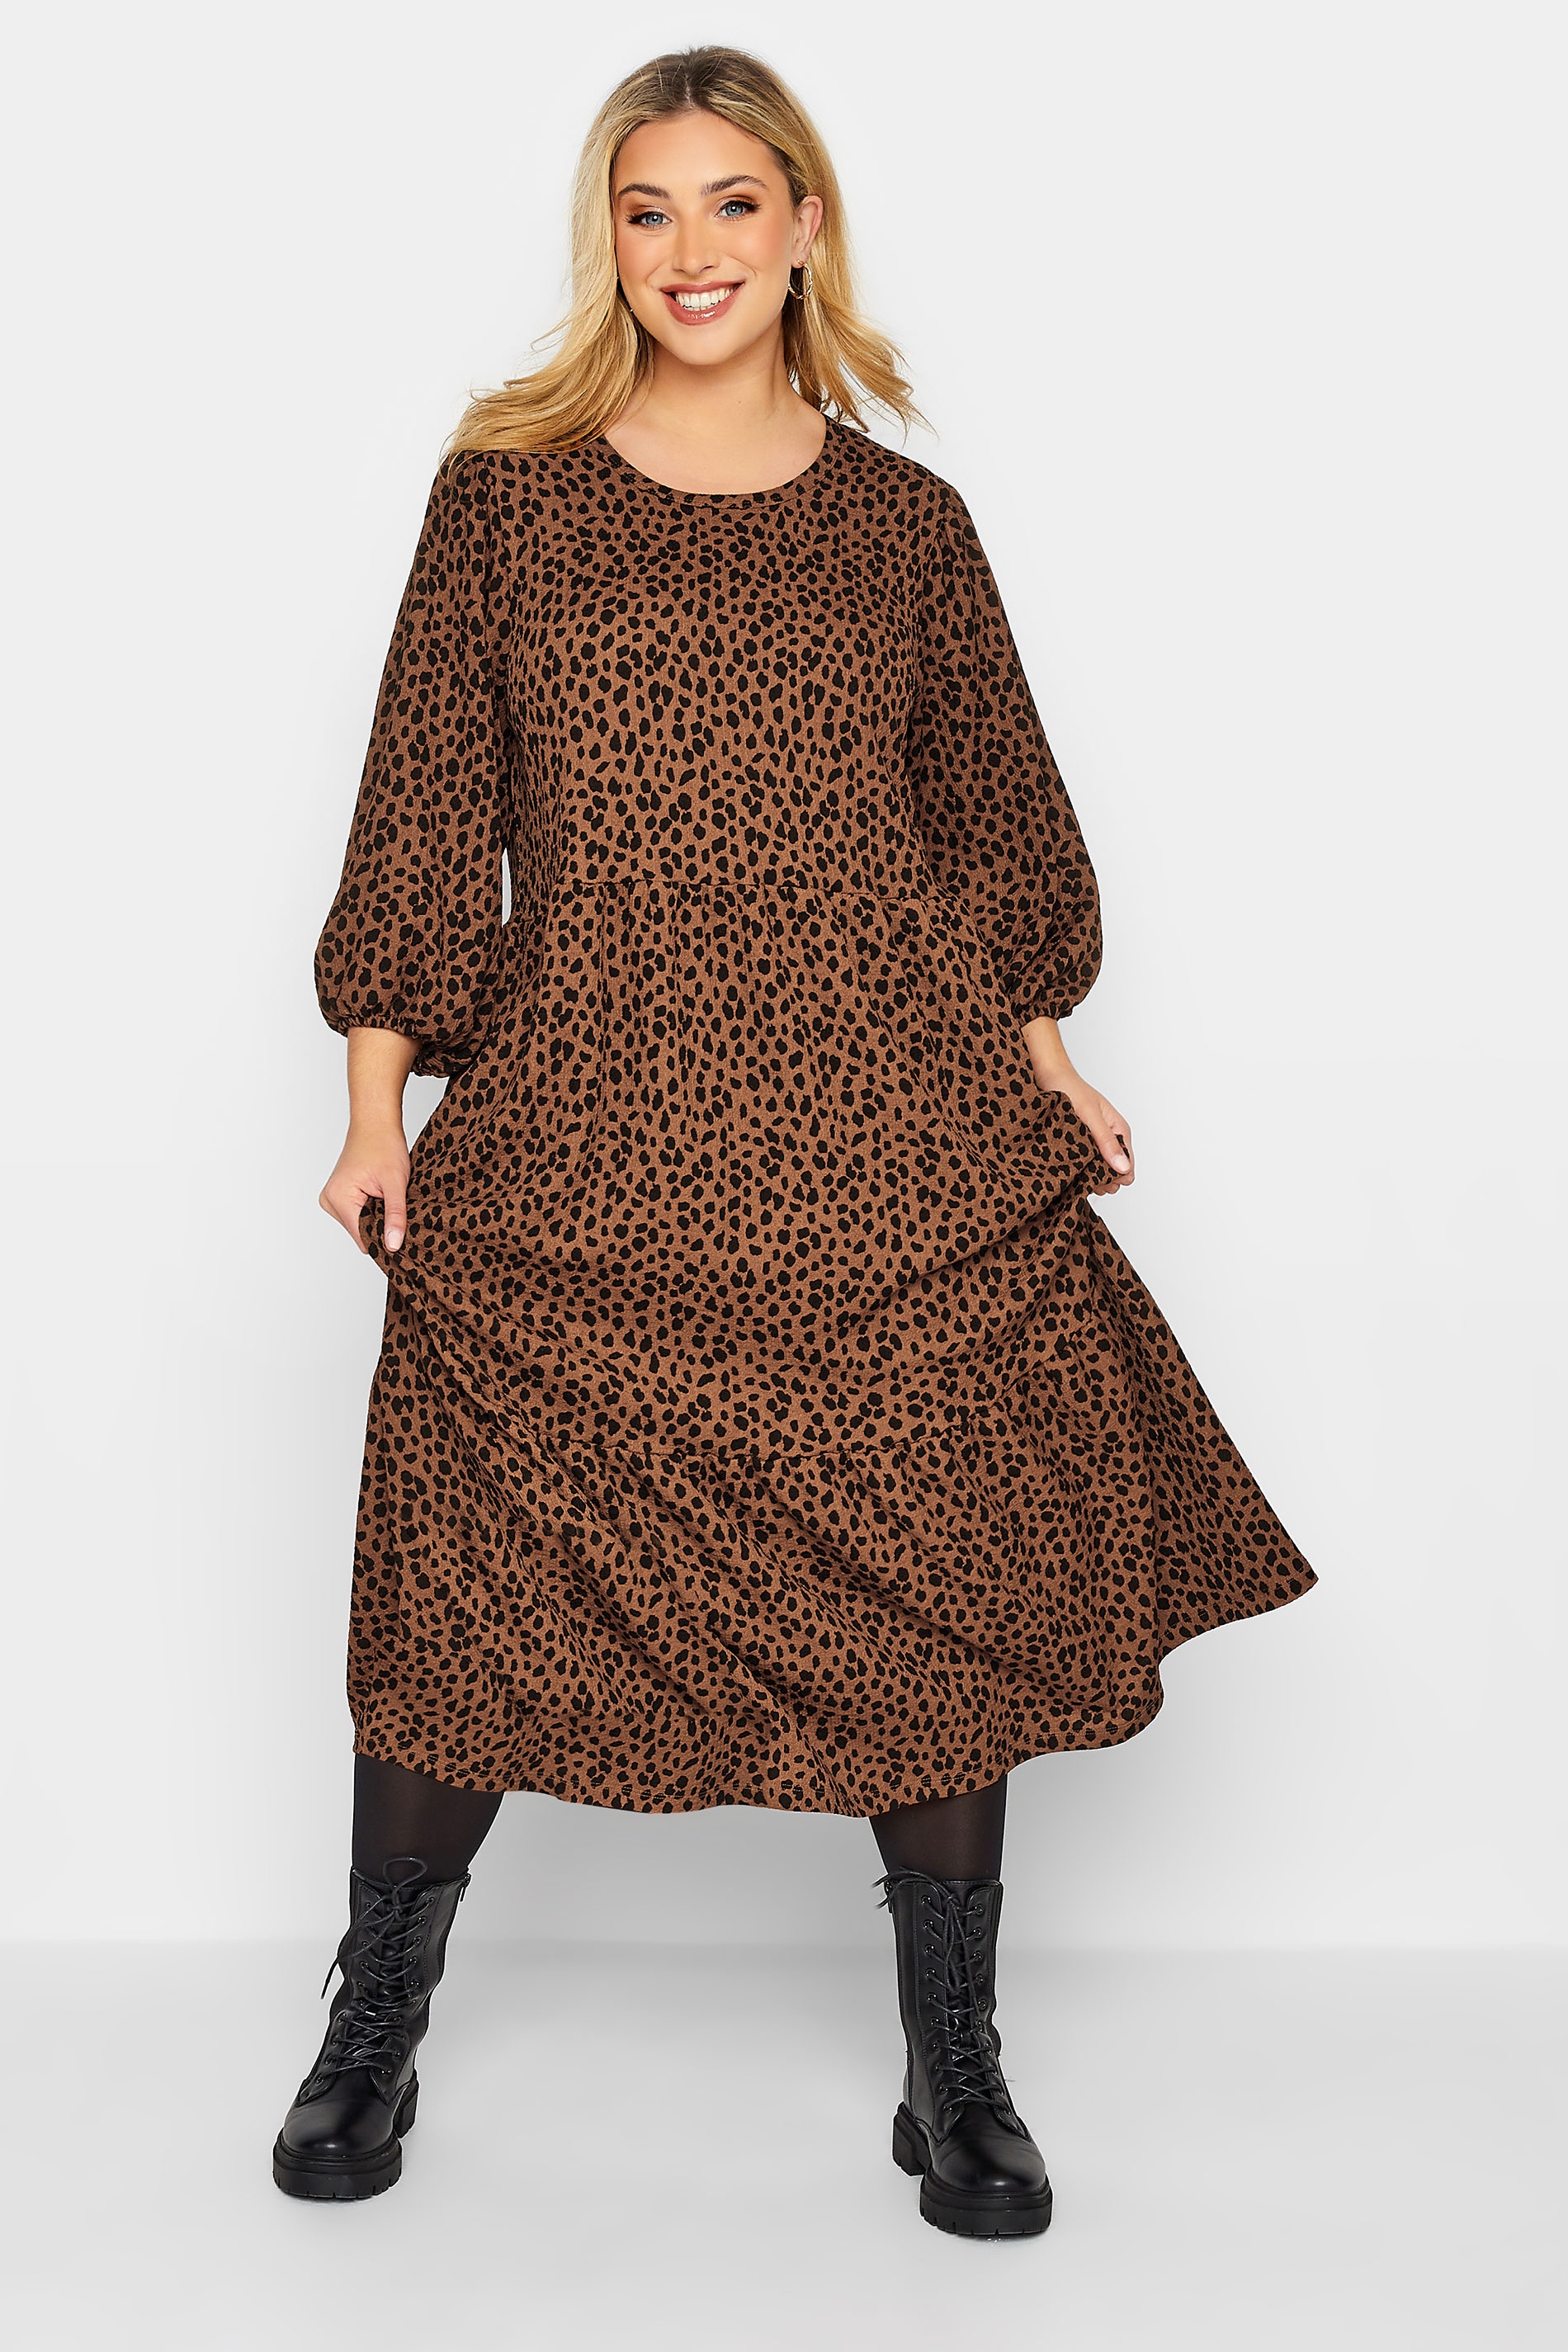 Plus Size Brown & Black Animal Print Frill Maxi Dress | Yours Clothing